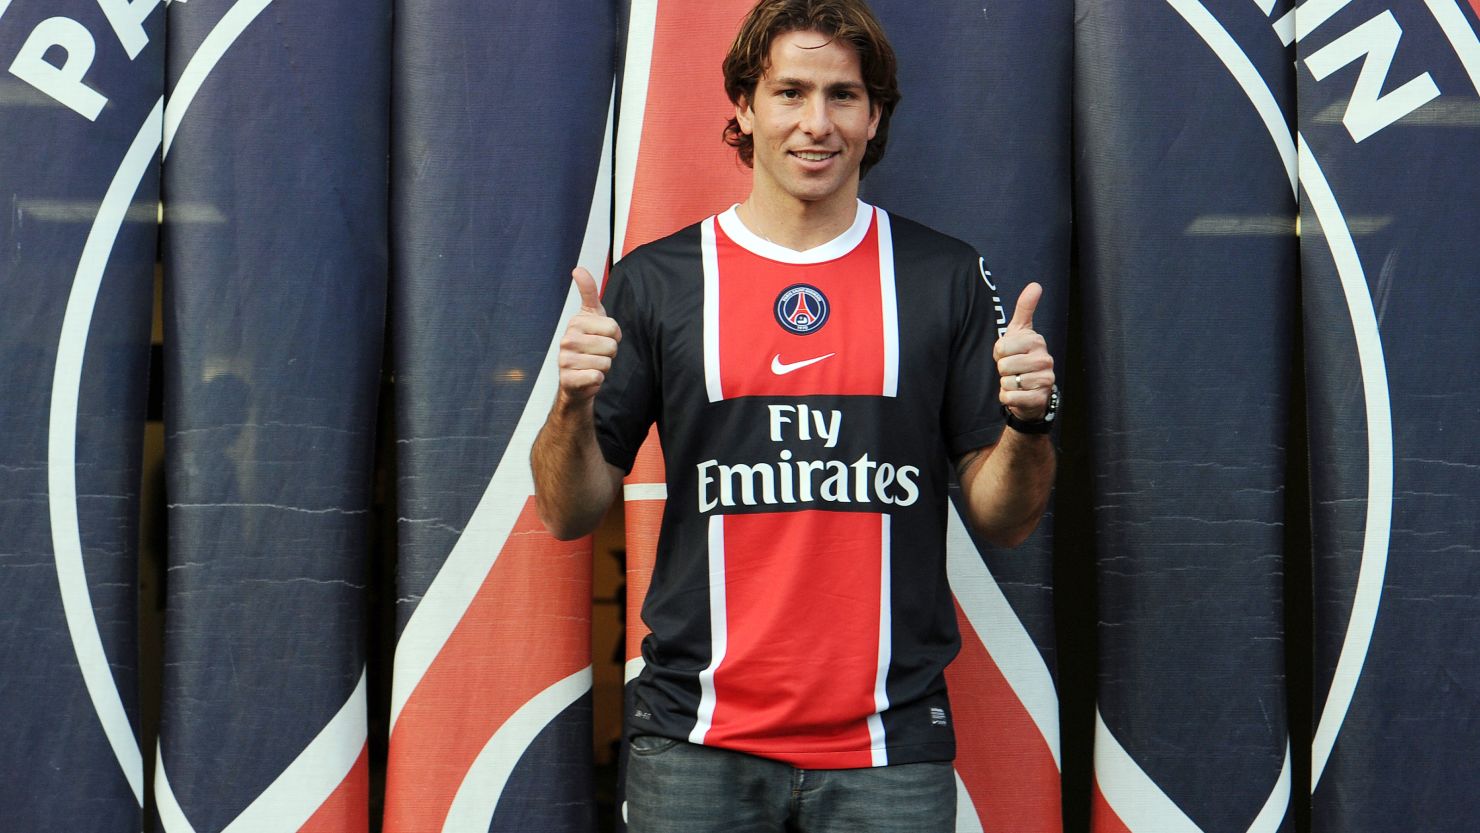 Maxwell parades in his new Paris St Germain kit after completing his signing from Barcelona.